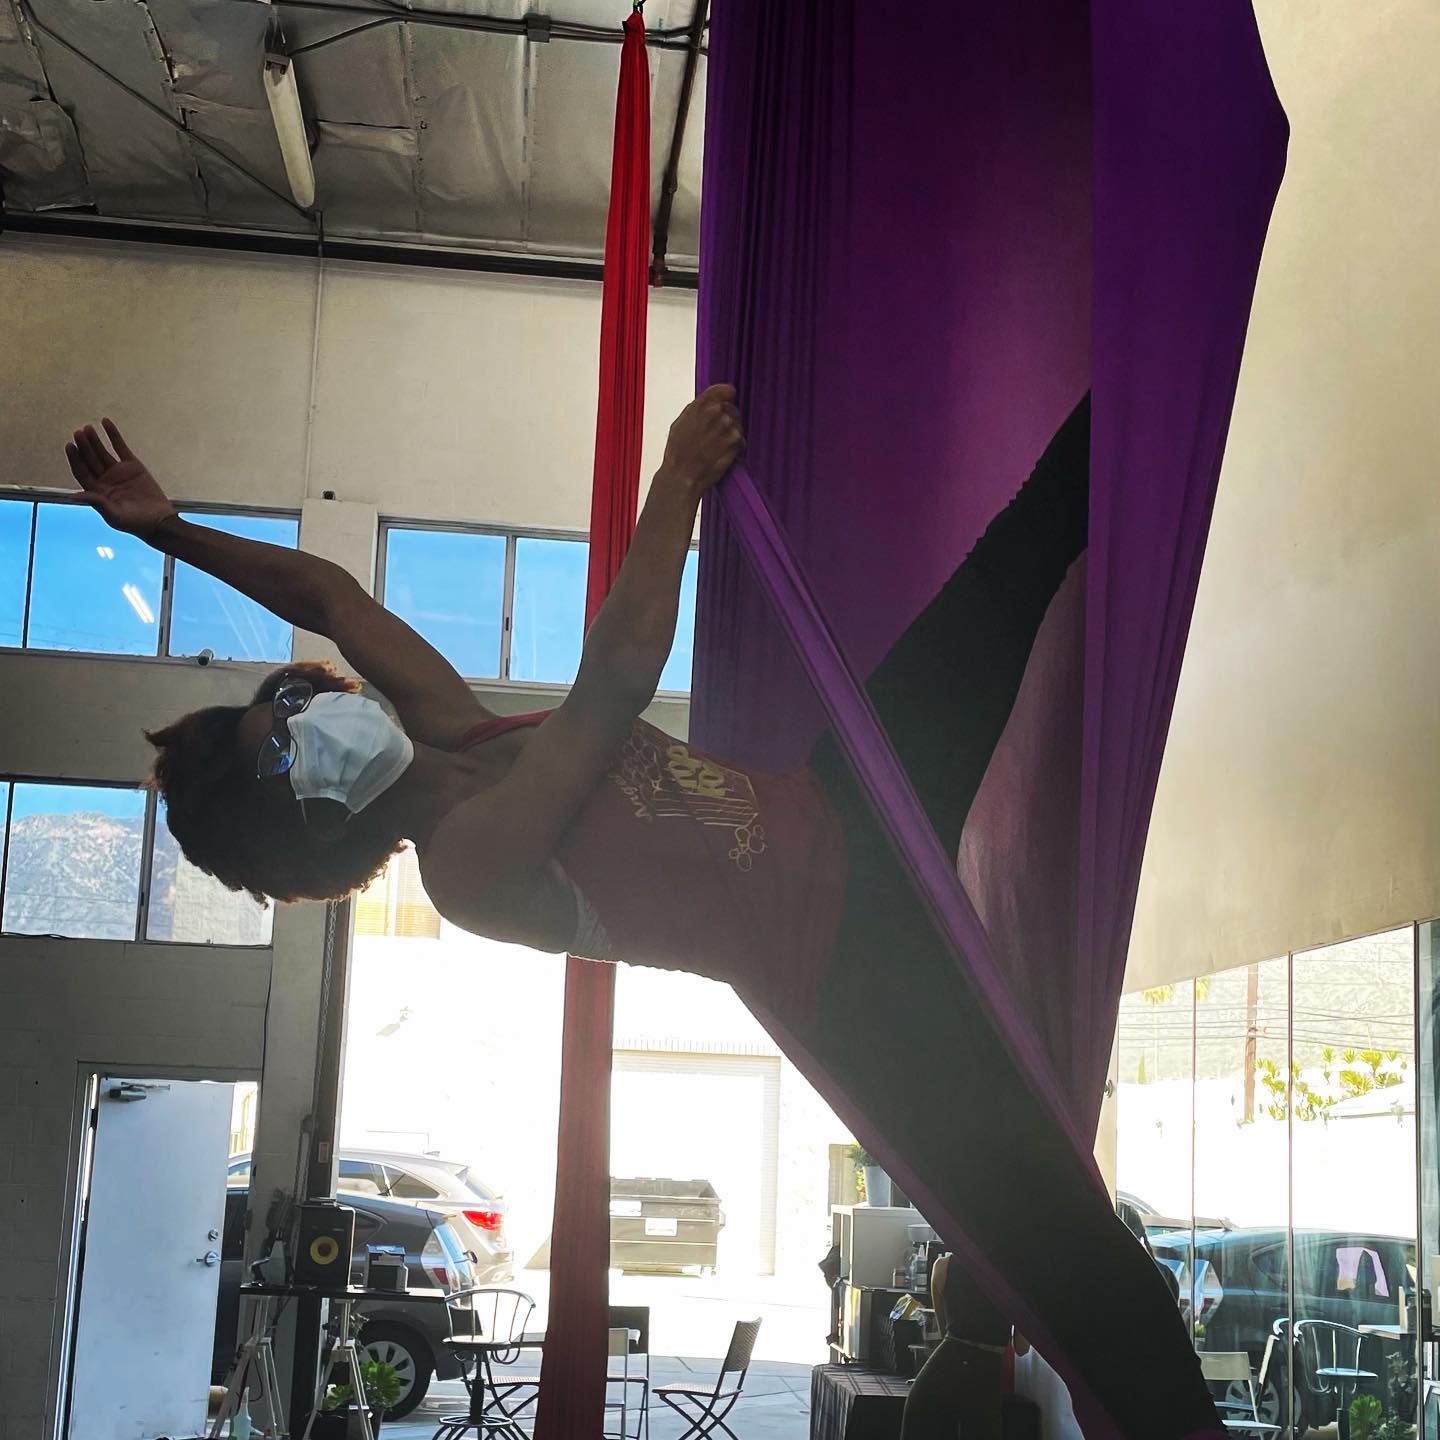 It ain’t the prettiest picture, but it’s an important one. This picture is from the first silks class I’ve taken in about 2 years, which is a huge deal to me. I learned that I lost much of my silks strength (😭) which was very humbling, but I know that I can go up from here (literally and figuratively). It’s so nice to get back to something that I enjoy, even when the journey will be a little more difficult. #silks #aerialsilks #StrengthOnZero